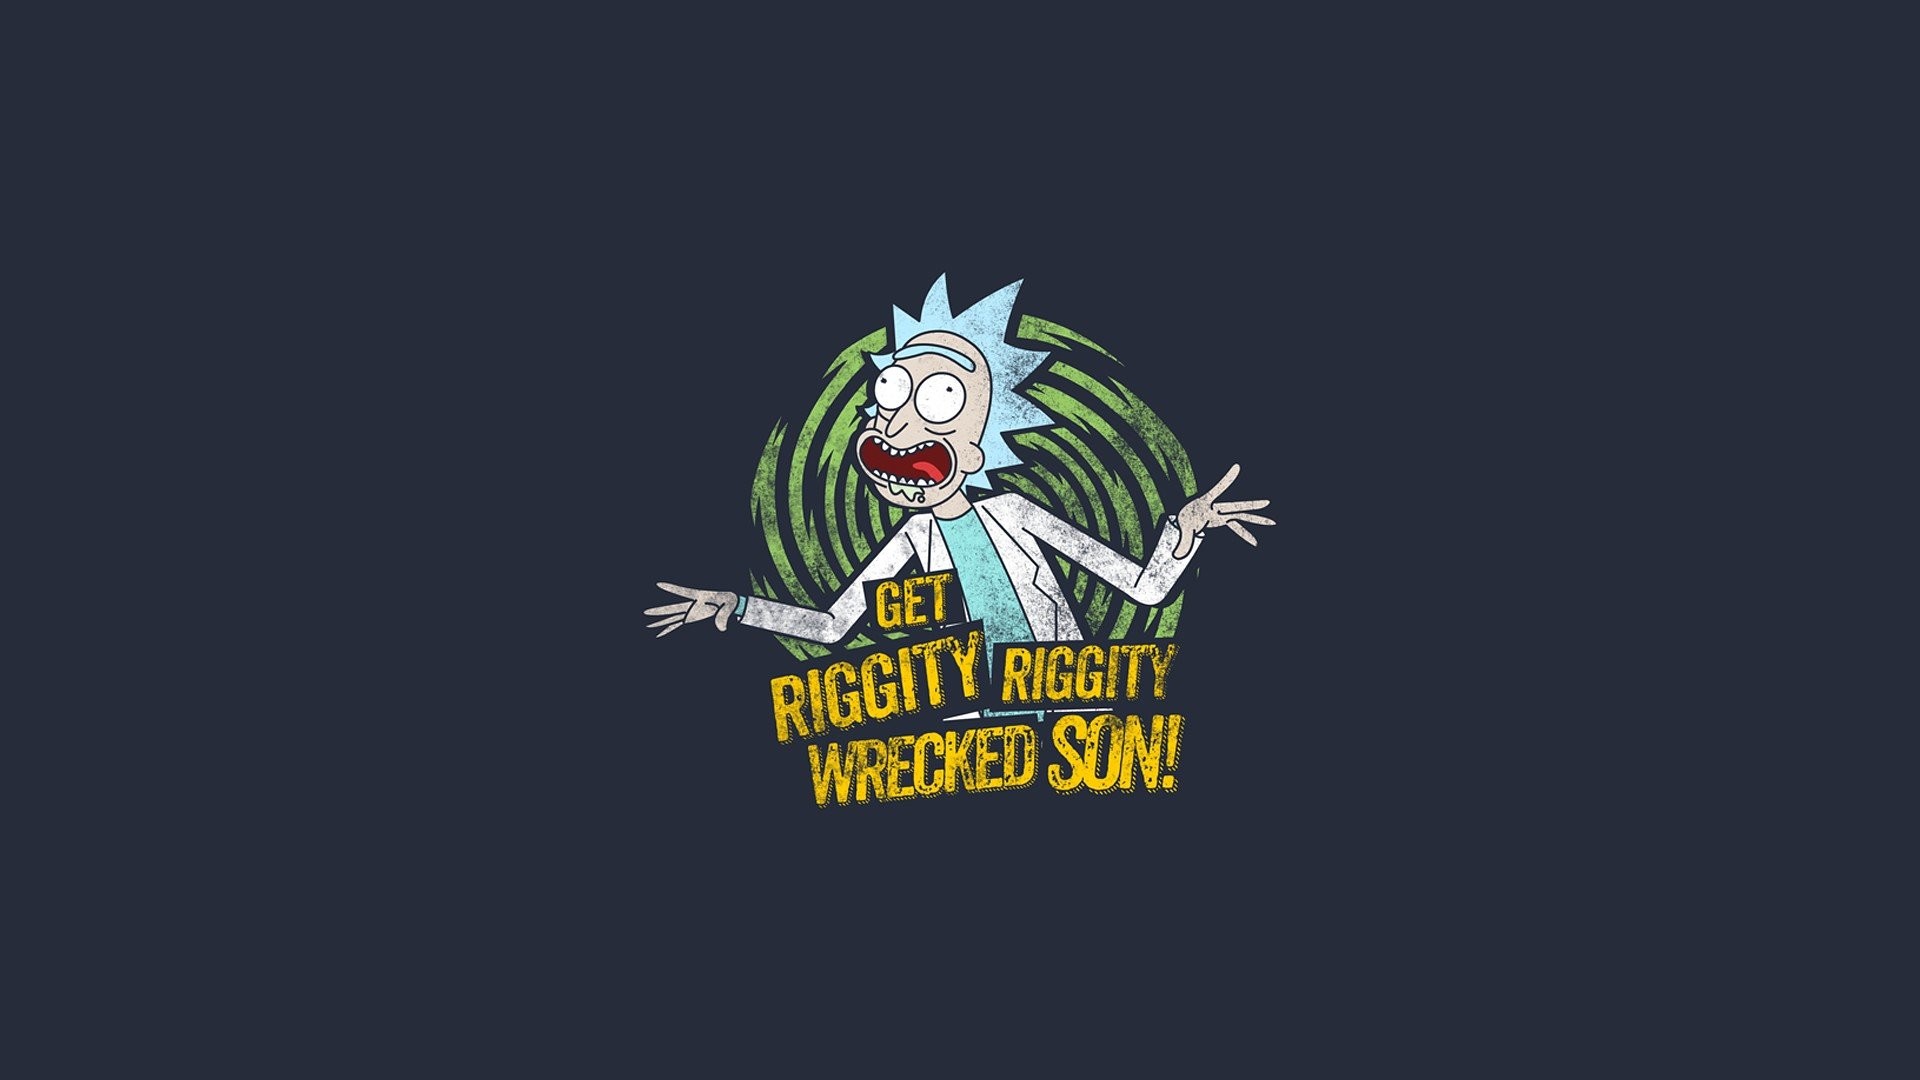 Dope Wallpapers Hd Data Src Full Size Dope Nike Wallpapers Rick And Morty Cover 1920x1080 Wallpaper Teahub Io People may have different perceptions of the word dope and there is a big chance that you will have your own perception of the word as well. dope wallpapers hd data src full size